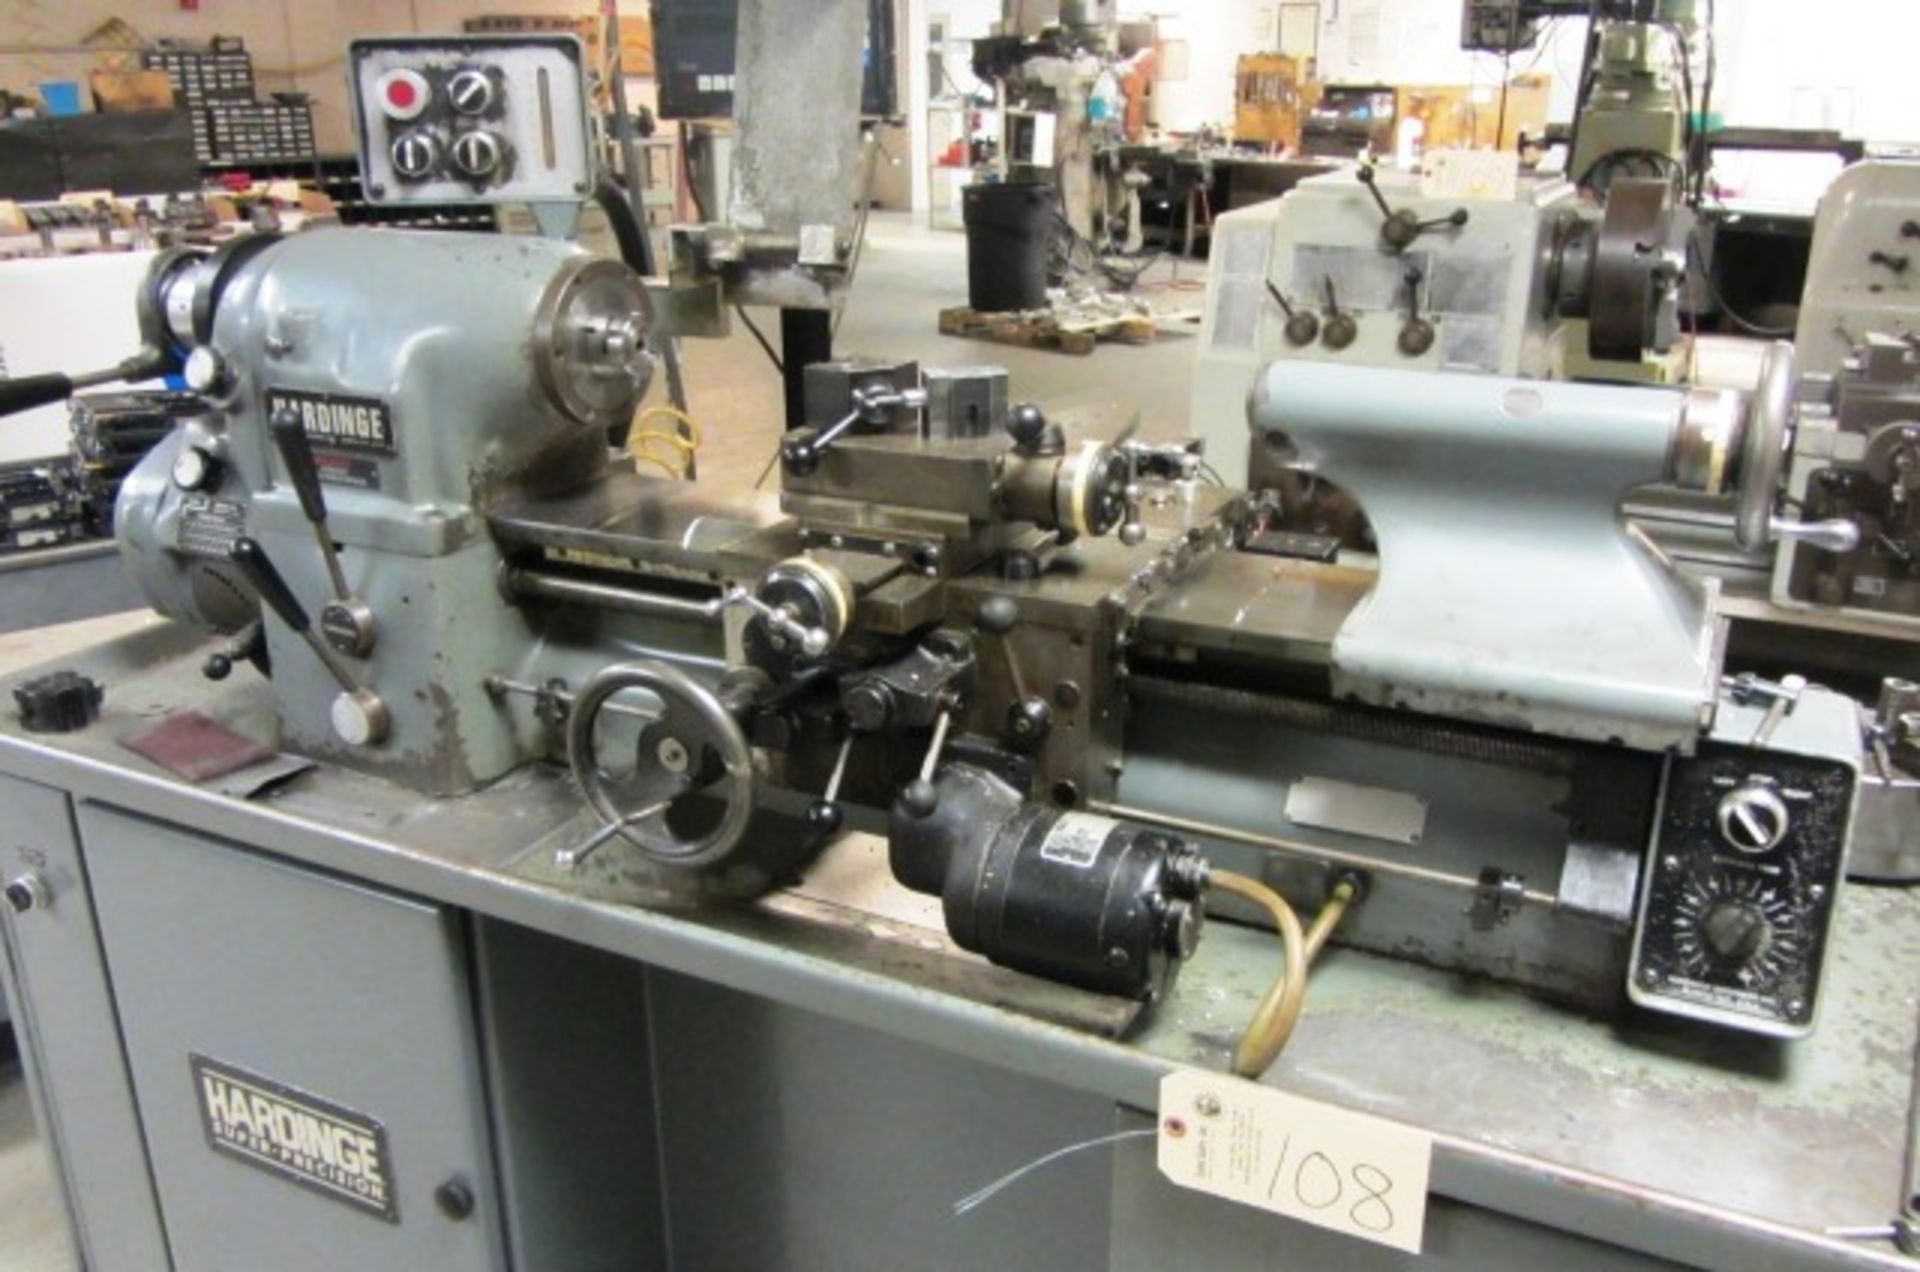 Hardinge Model HLVH Super Precision Engine Lathe with 1'' Bore, Spindle Speeds Variable to 3,000